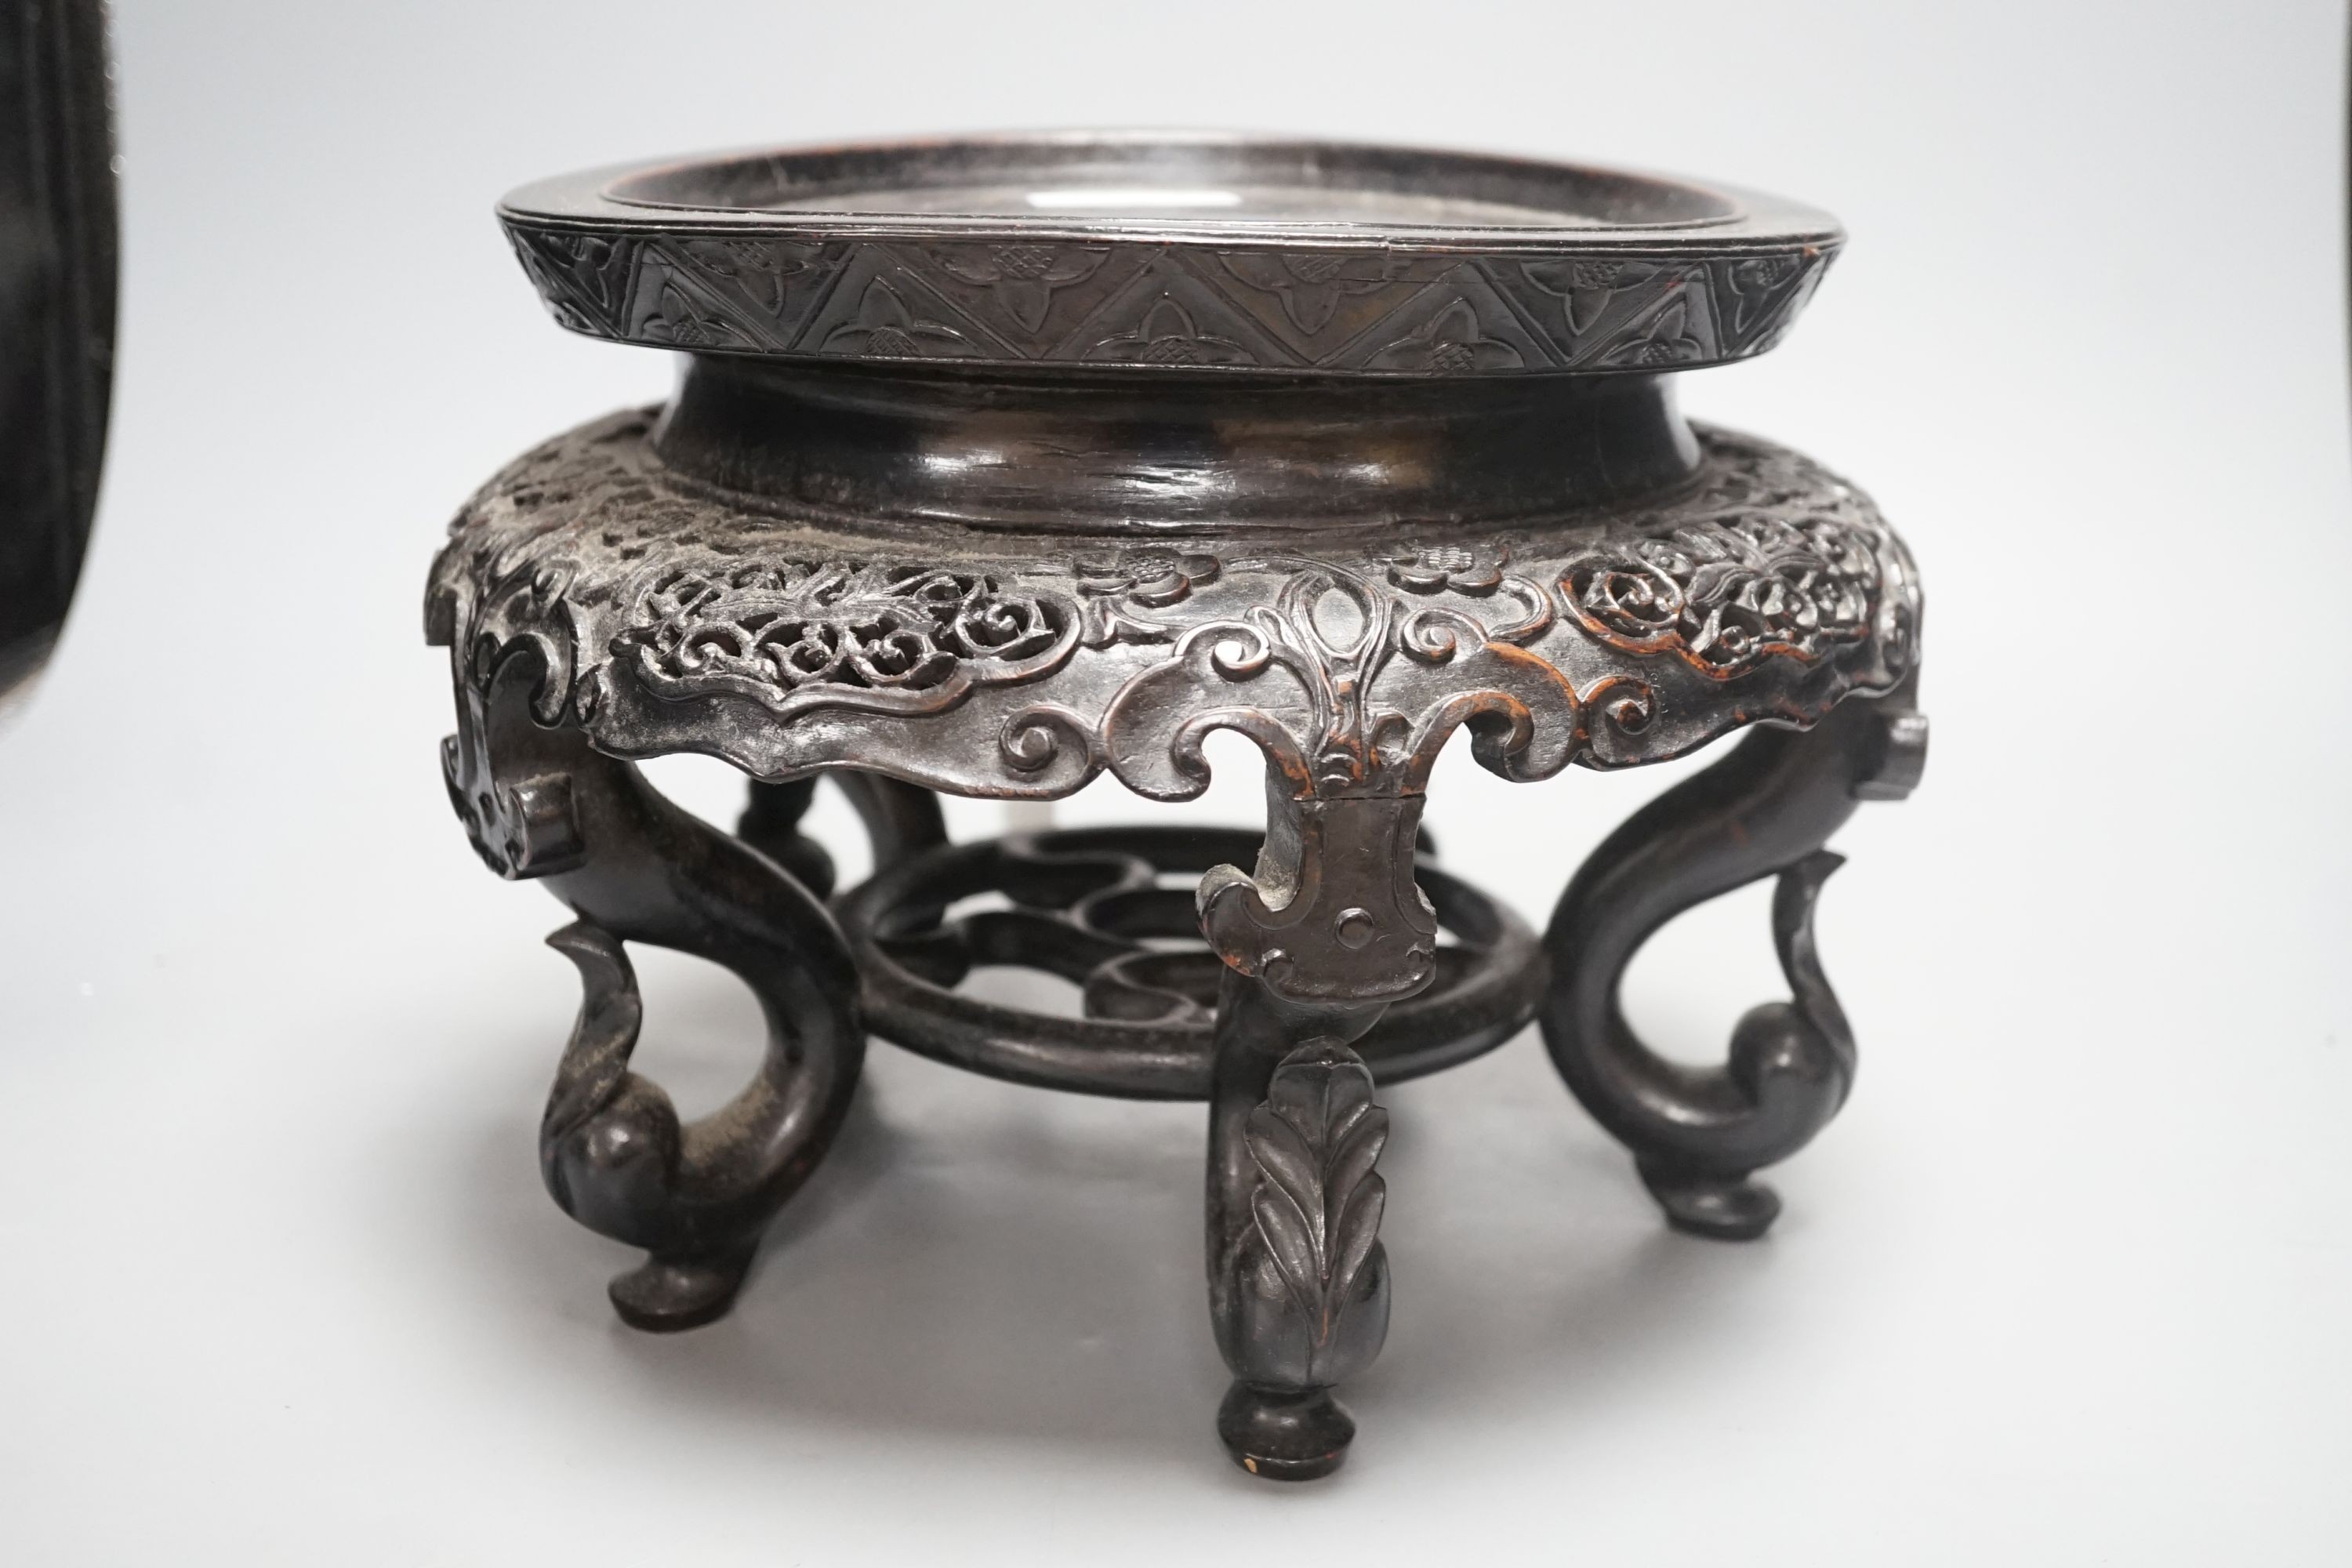 A Chinese carved wood vase stand - 20cm tall - Image 2 of 3